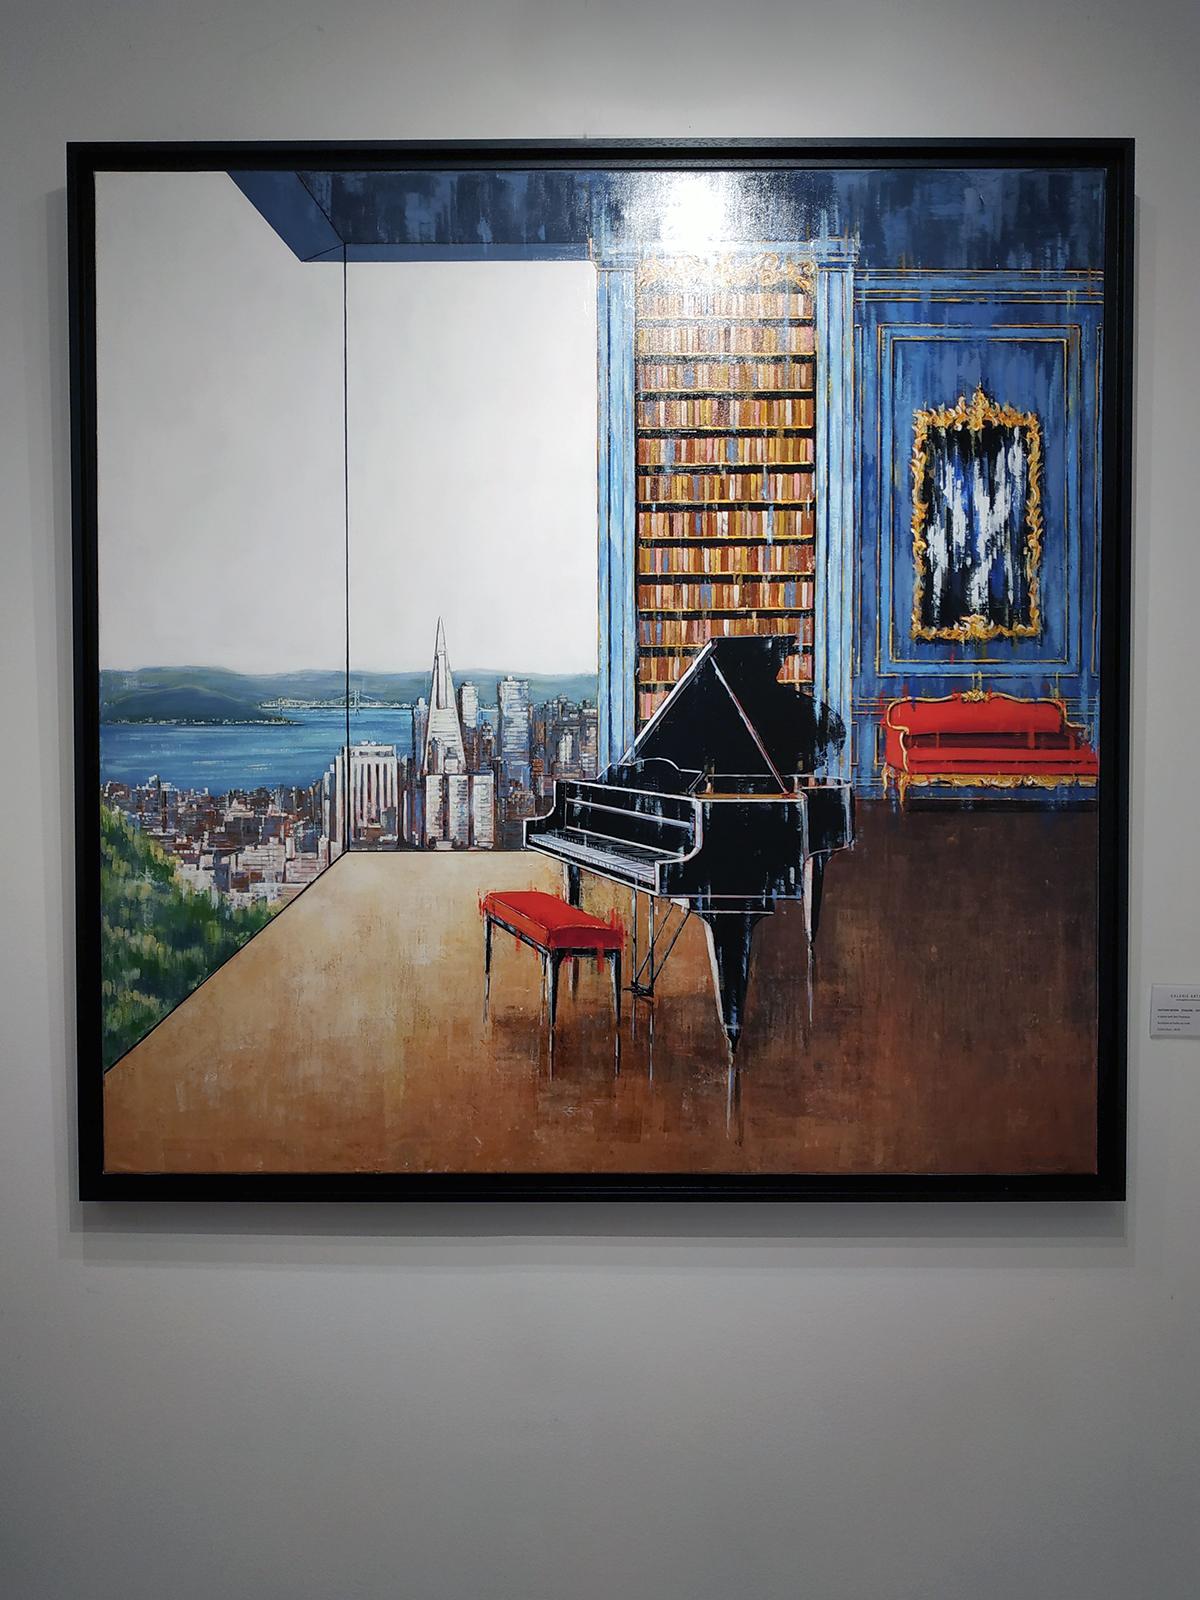 A piano and San Francisco - Painting by Nathan Neven